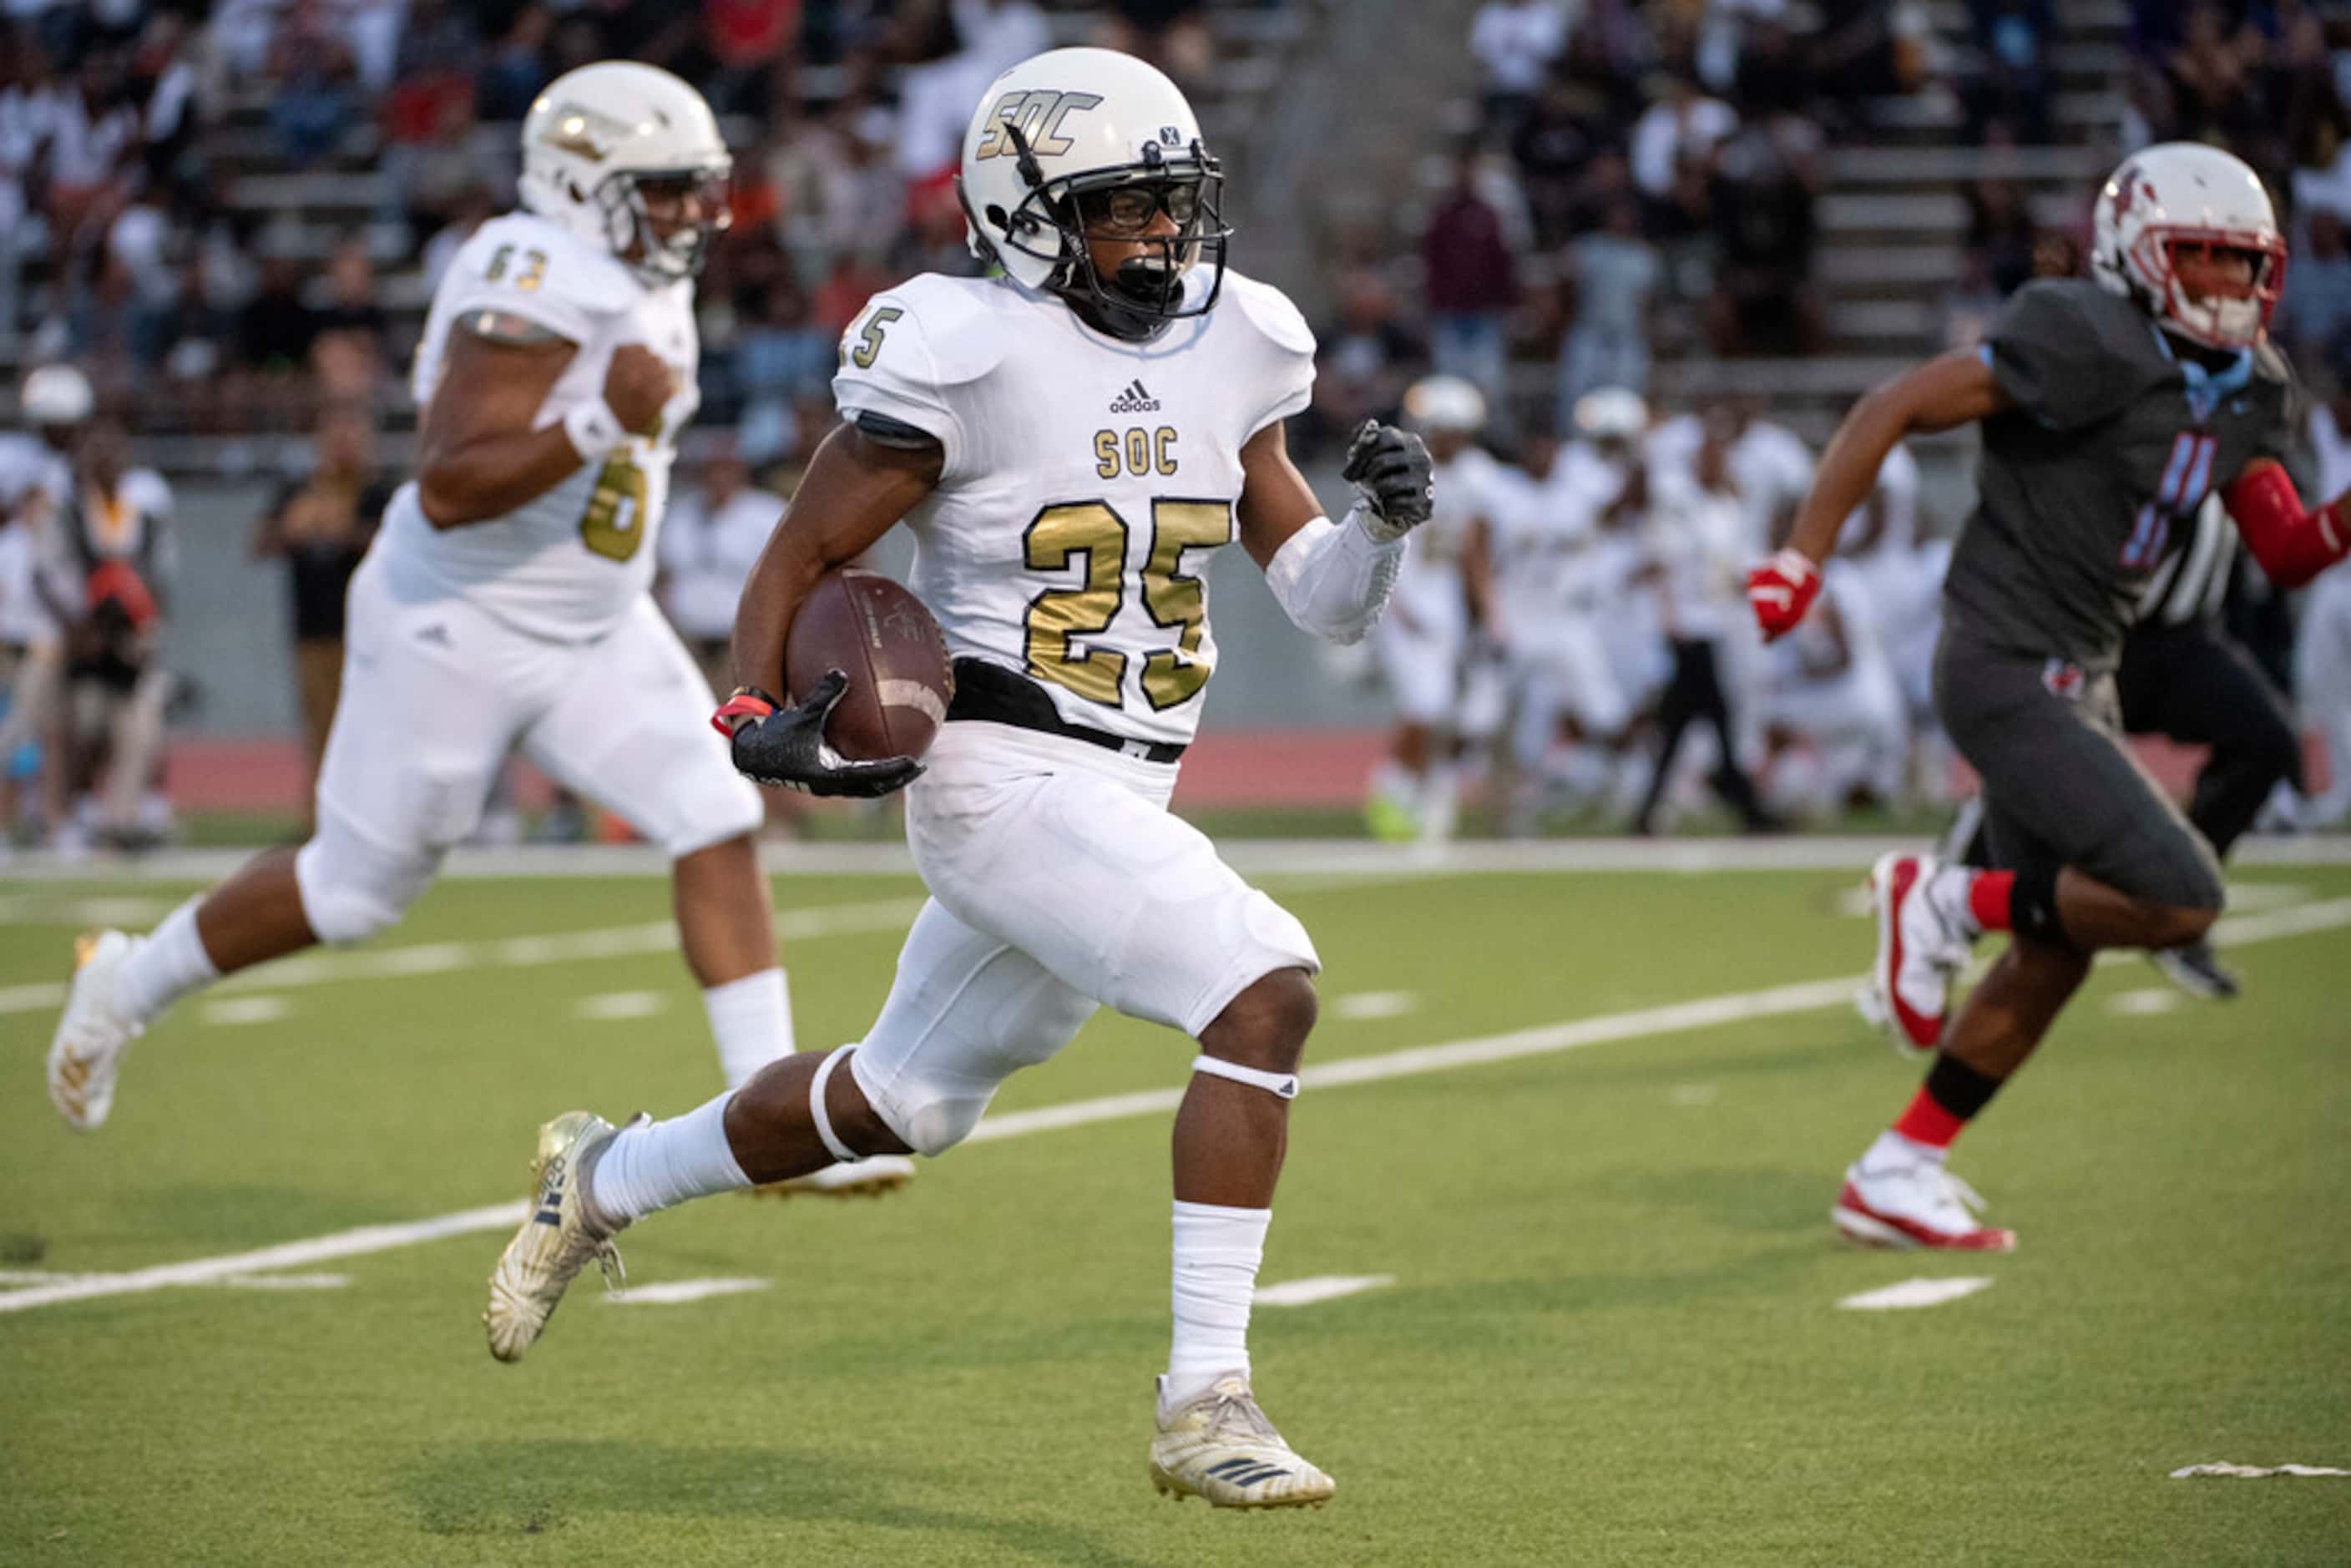 South Oak Cliff junior running back Cameron Davis (25) races for the end zone on a touchdown...